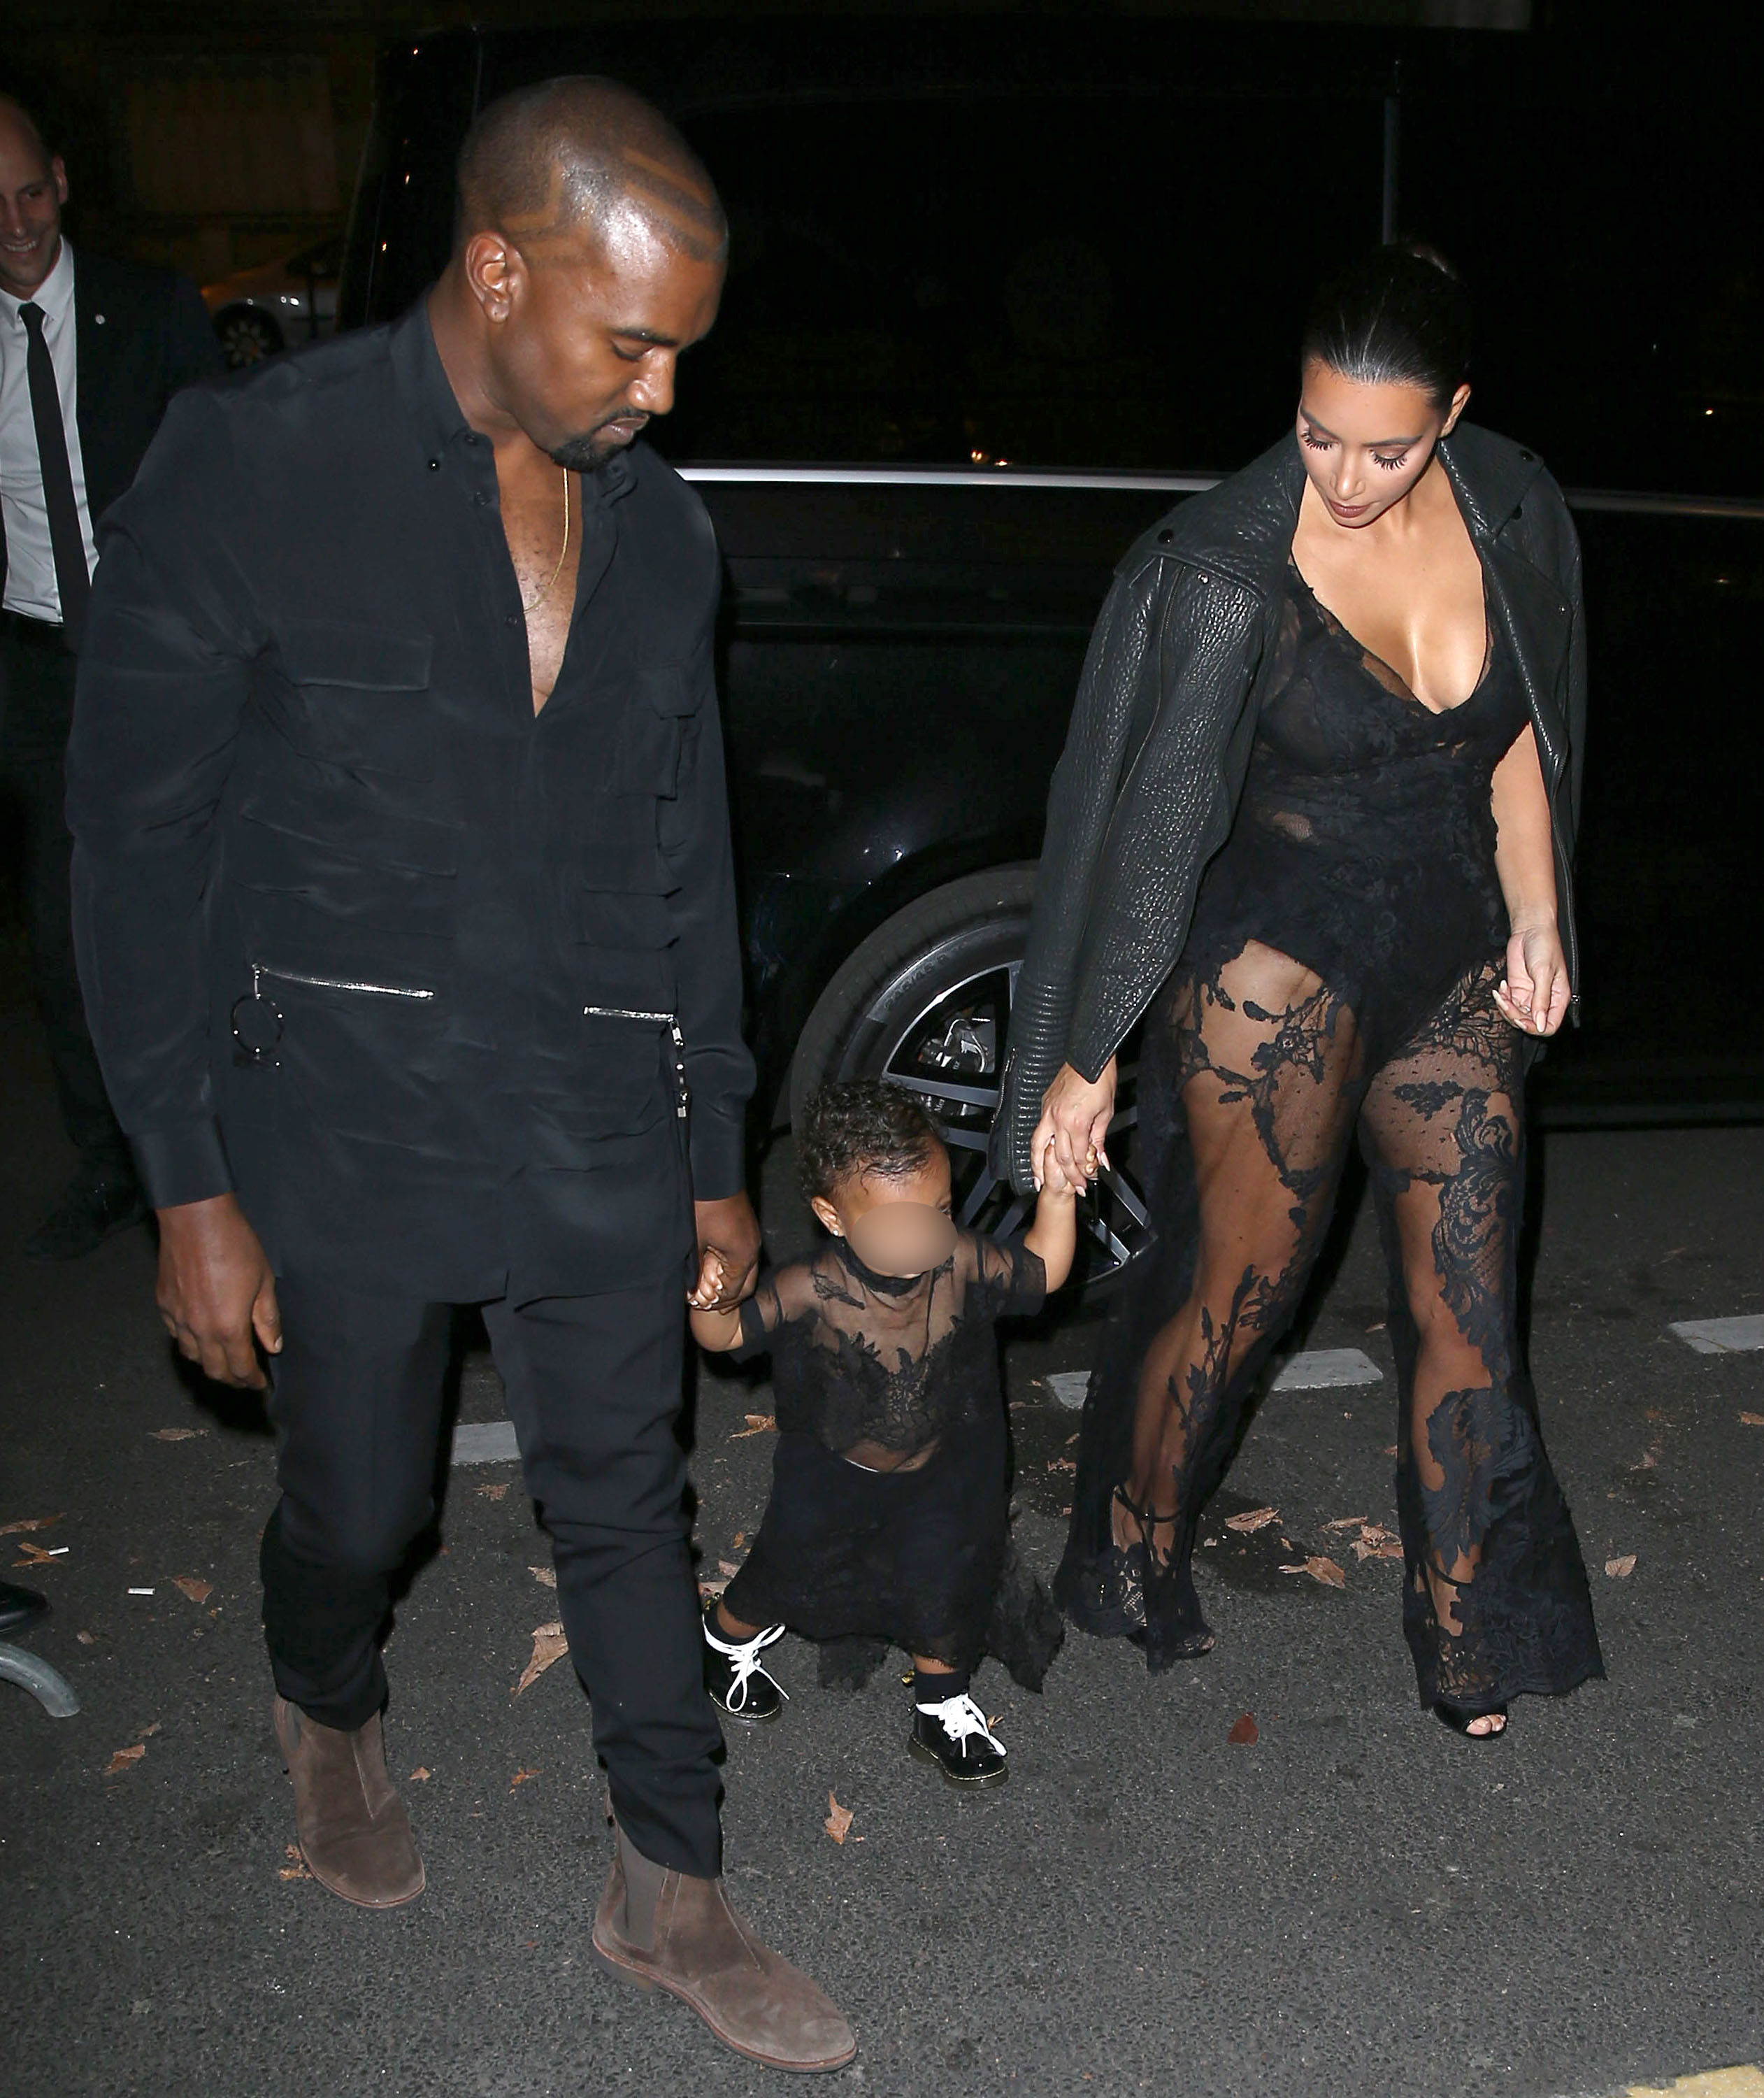 What the Fugly Fug Fuggery: Kim Kardashian and North West in Givenchy